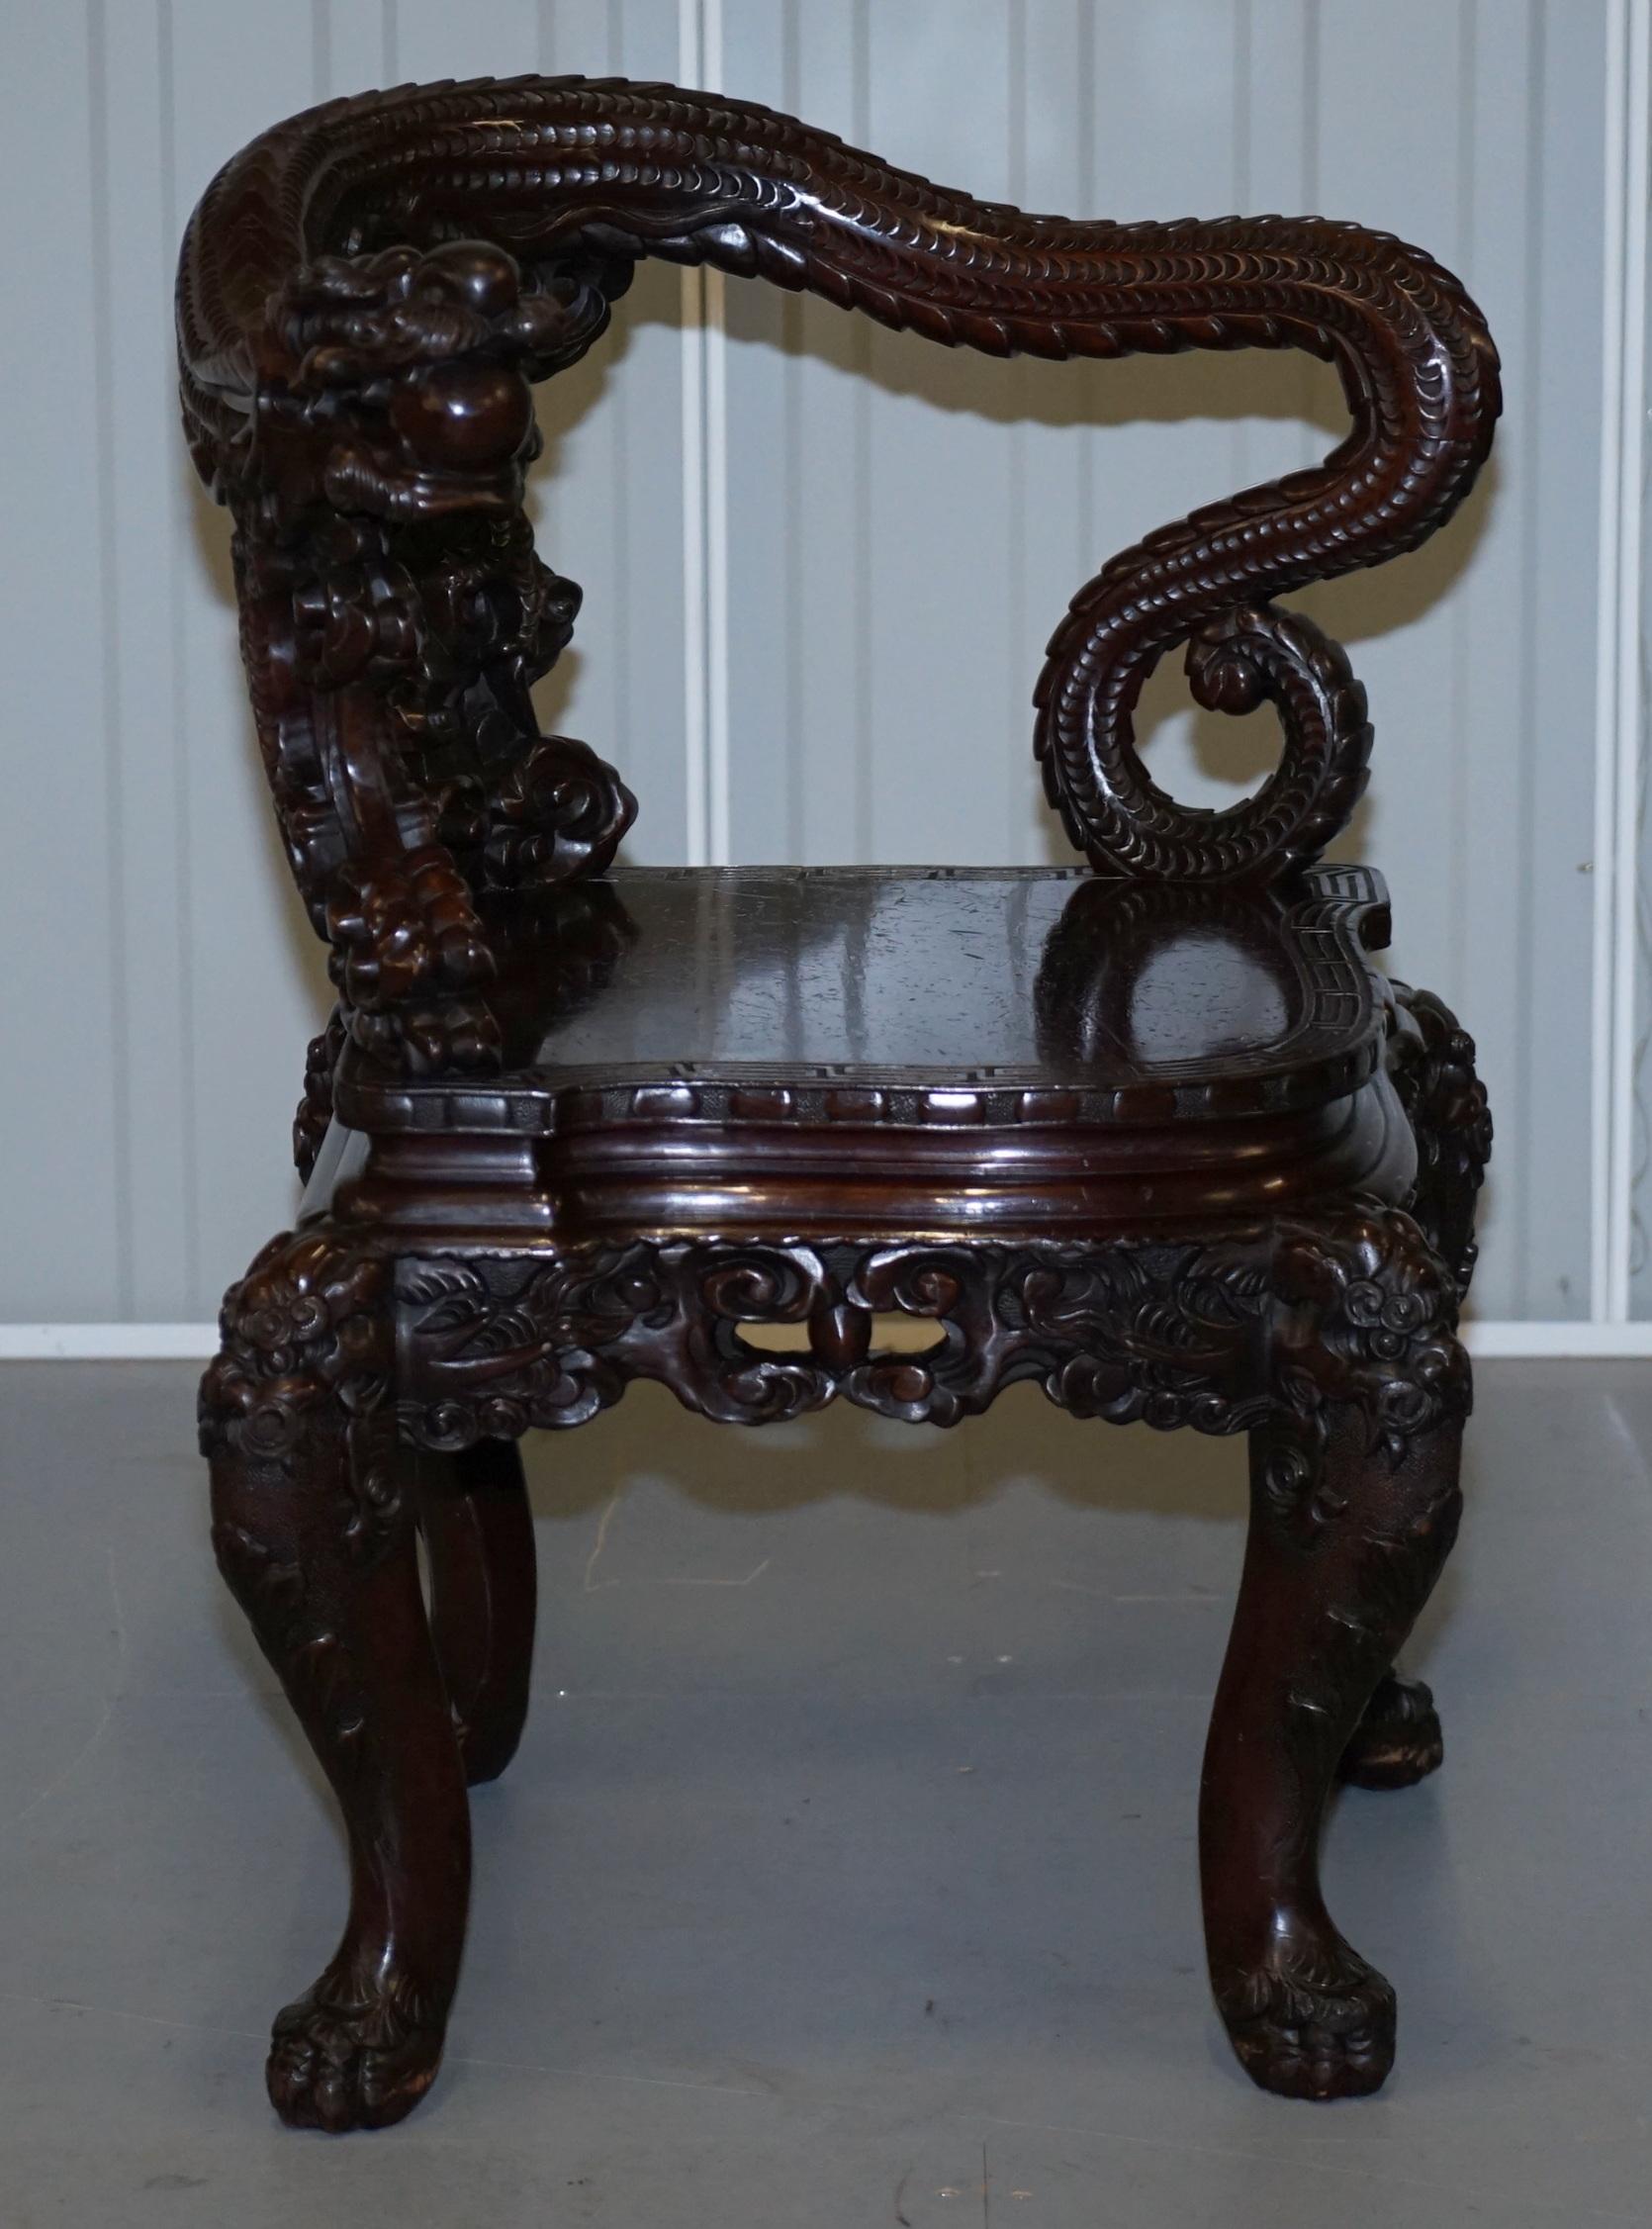 We are delighted to offer for sale this stunning original Japanese Export circa 1880 hand carved Hardwood corner chair with oversized curled Dragon back rest

A very good looking well made and decorative armchair, these come up for sale regularly